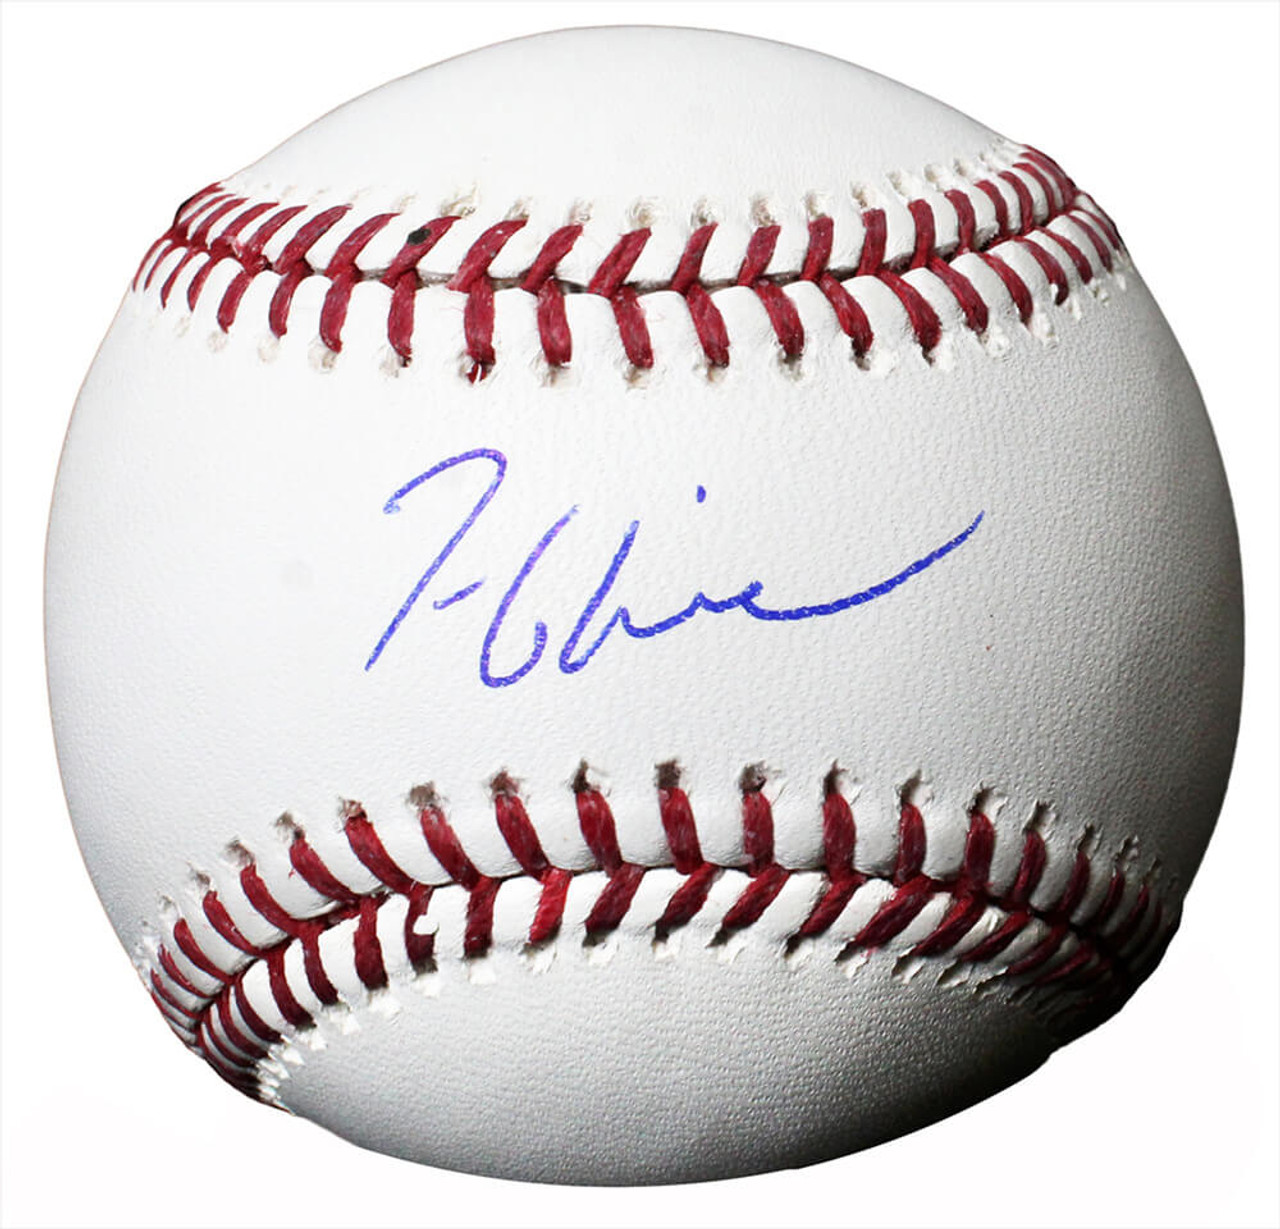 Tom Glavine Signed Rawlings Official MLB Baseball - Schwartz Authenticated